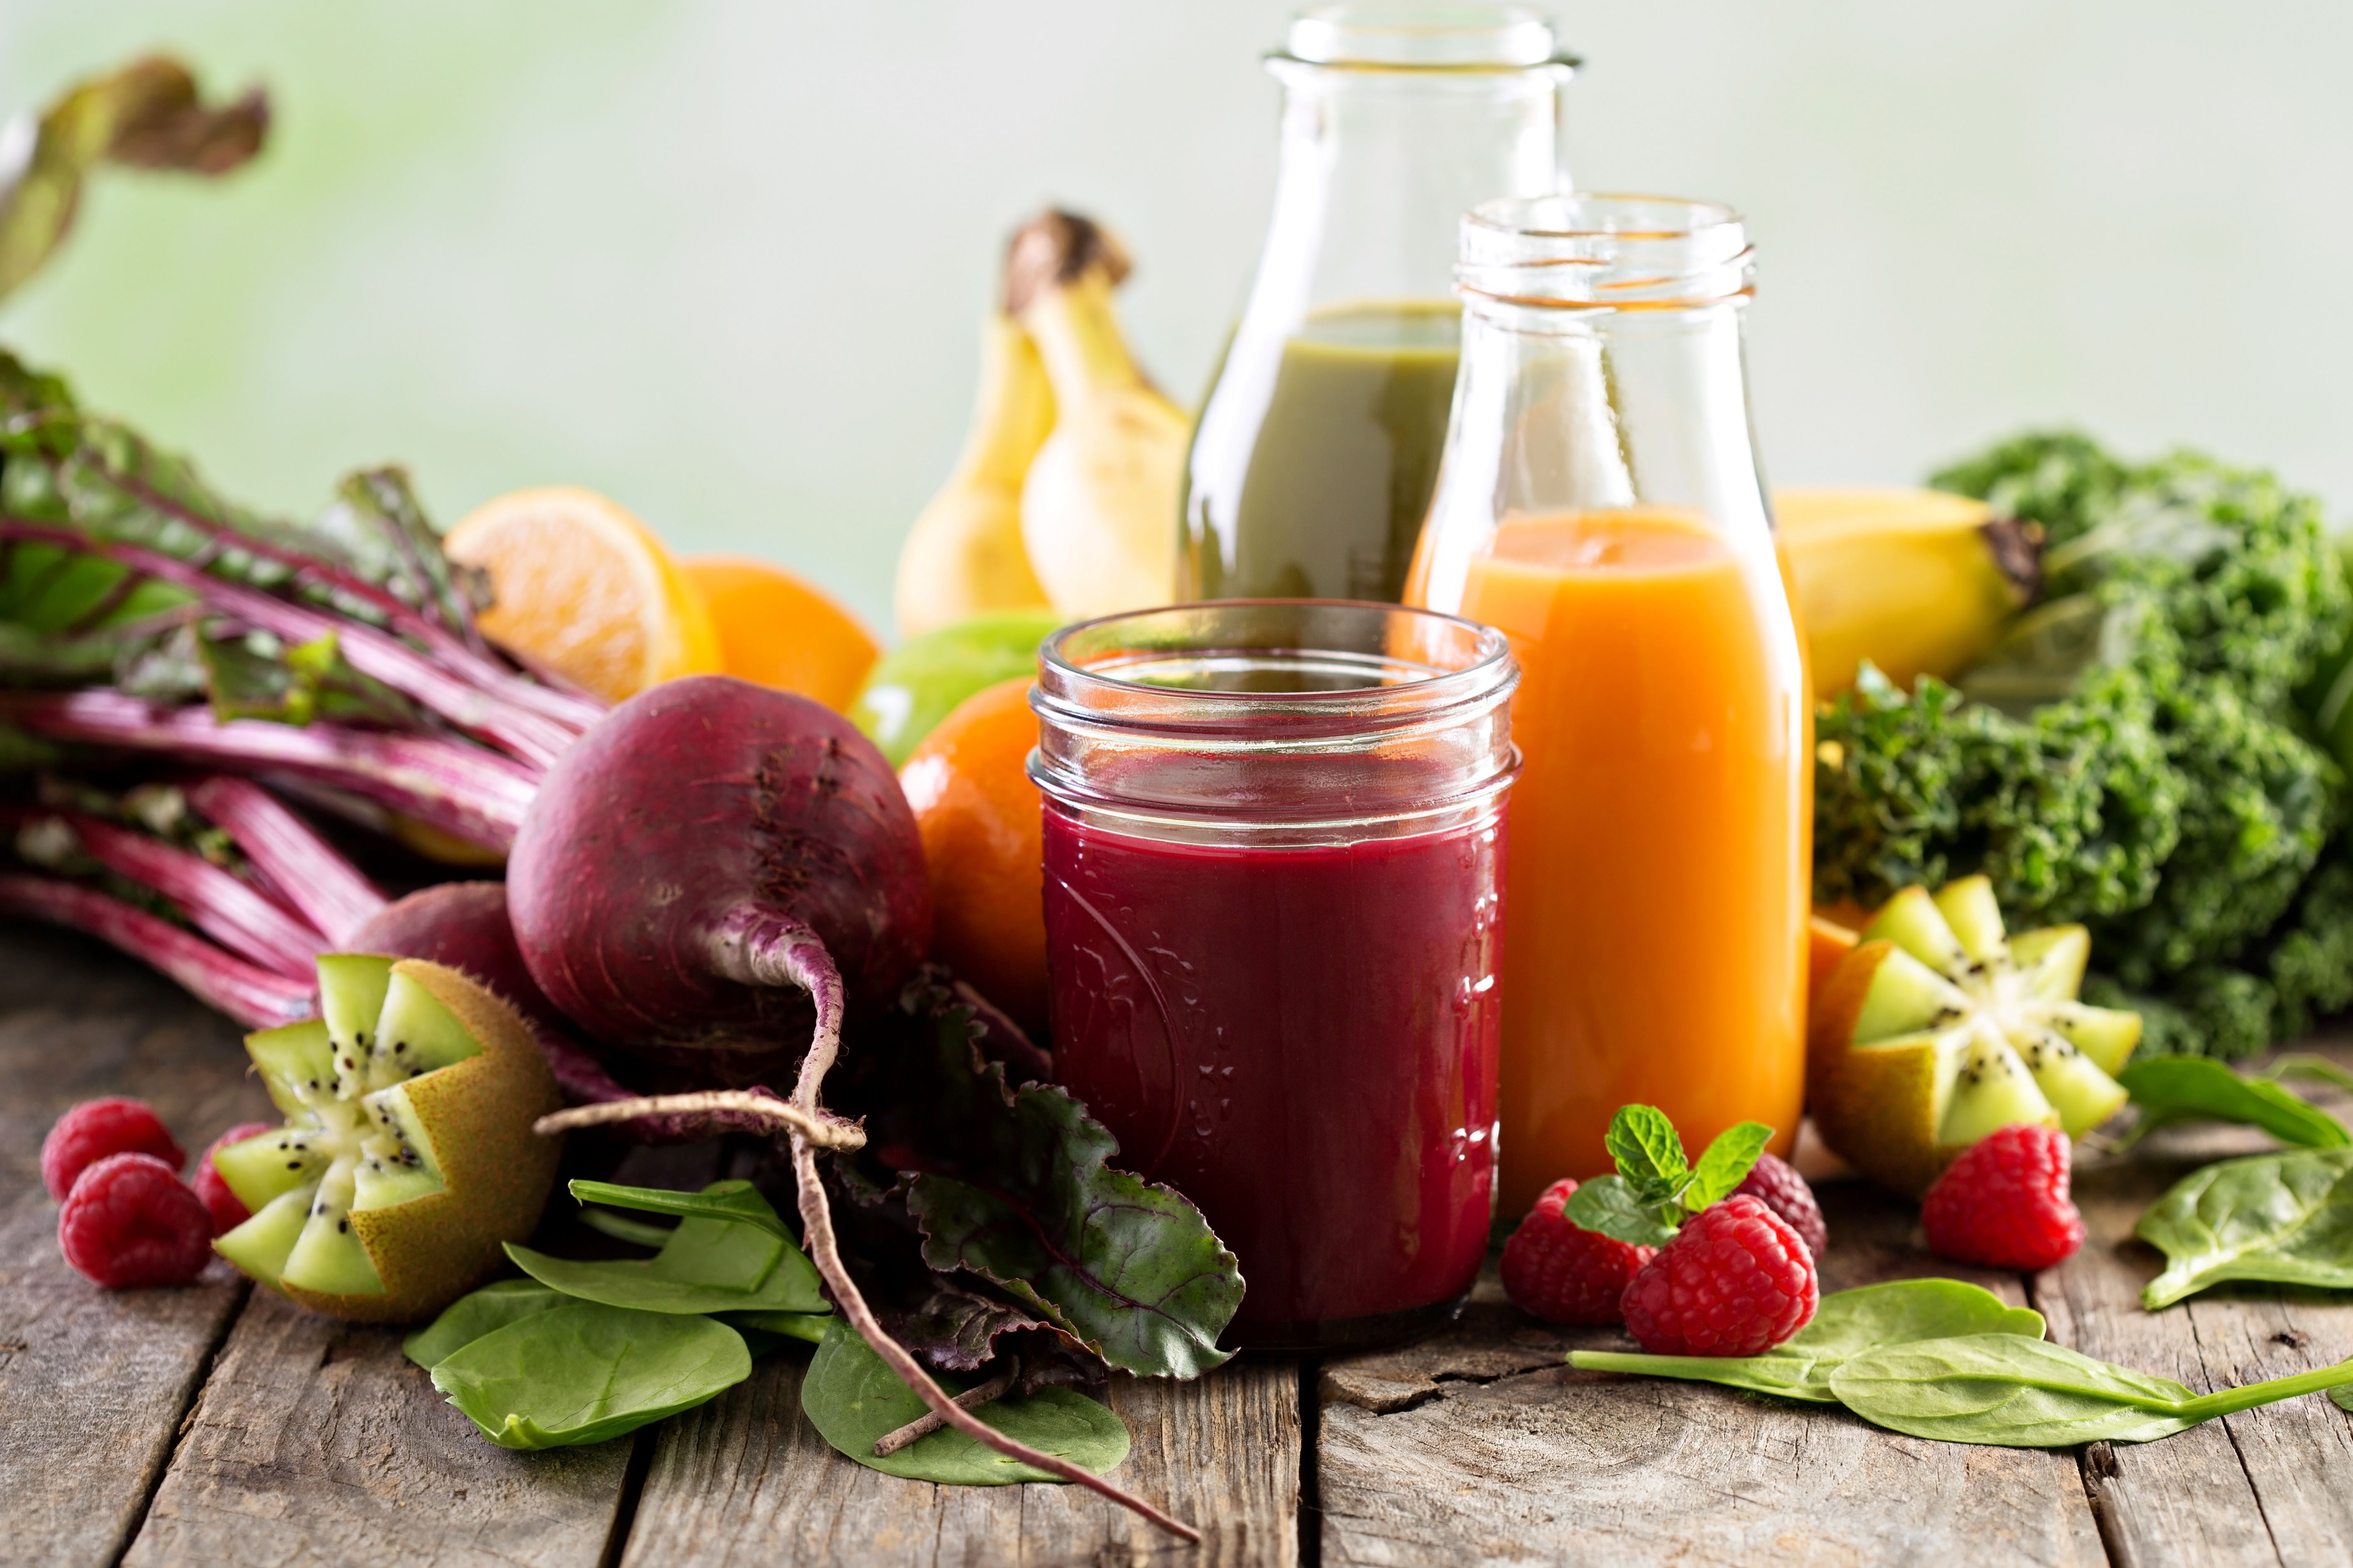 All About the Juicing & Beverage Concentrate Craze